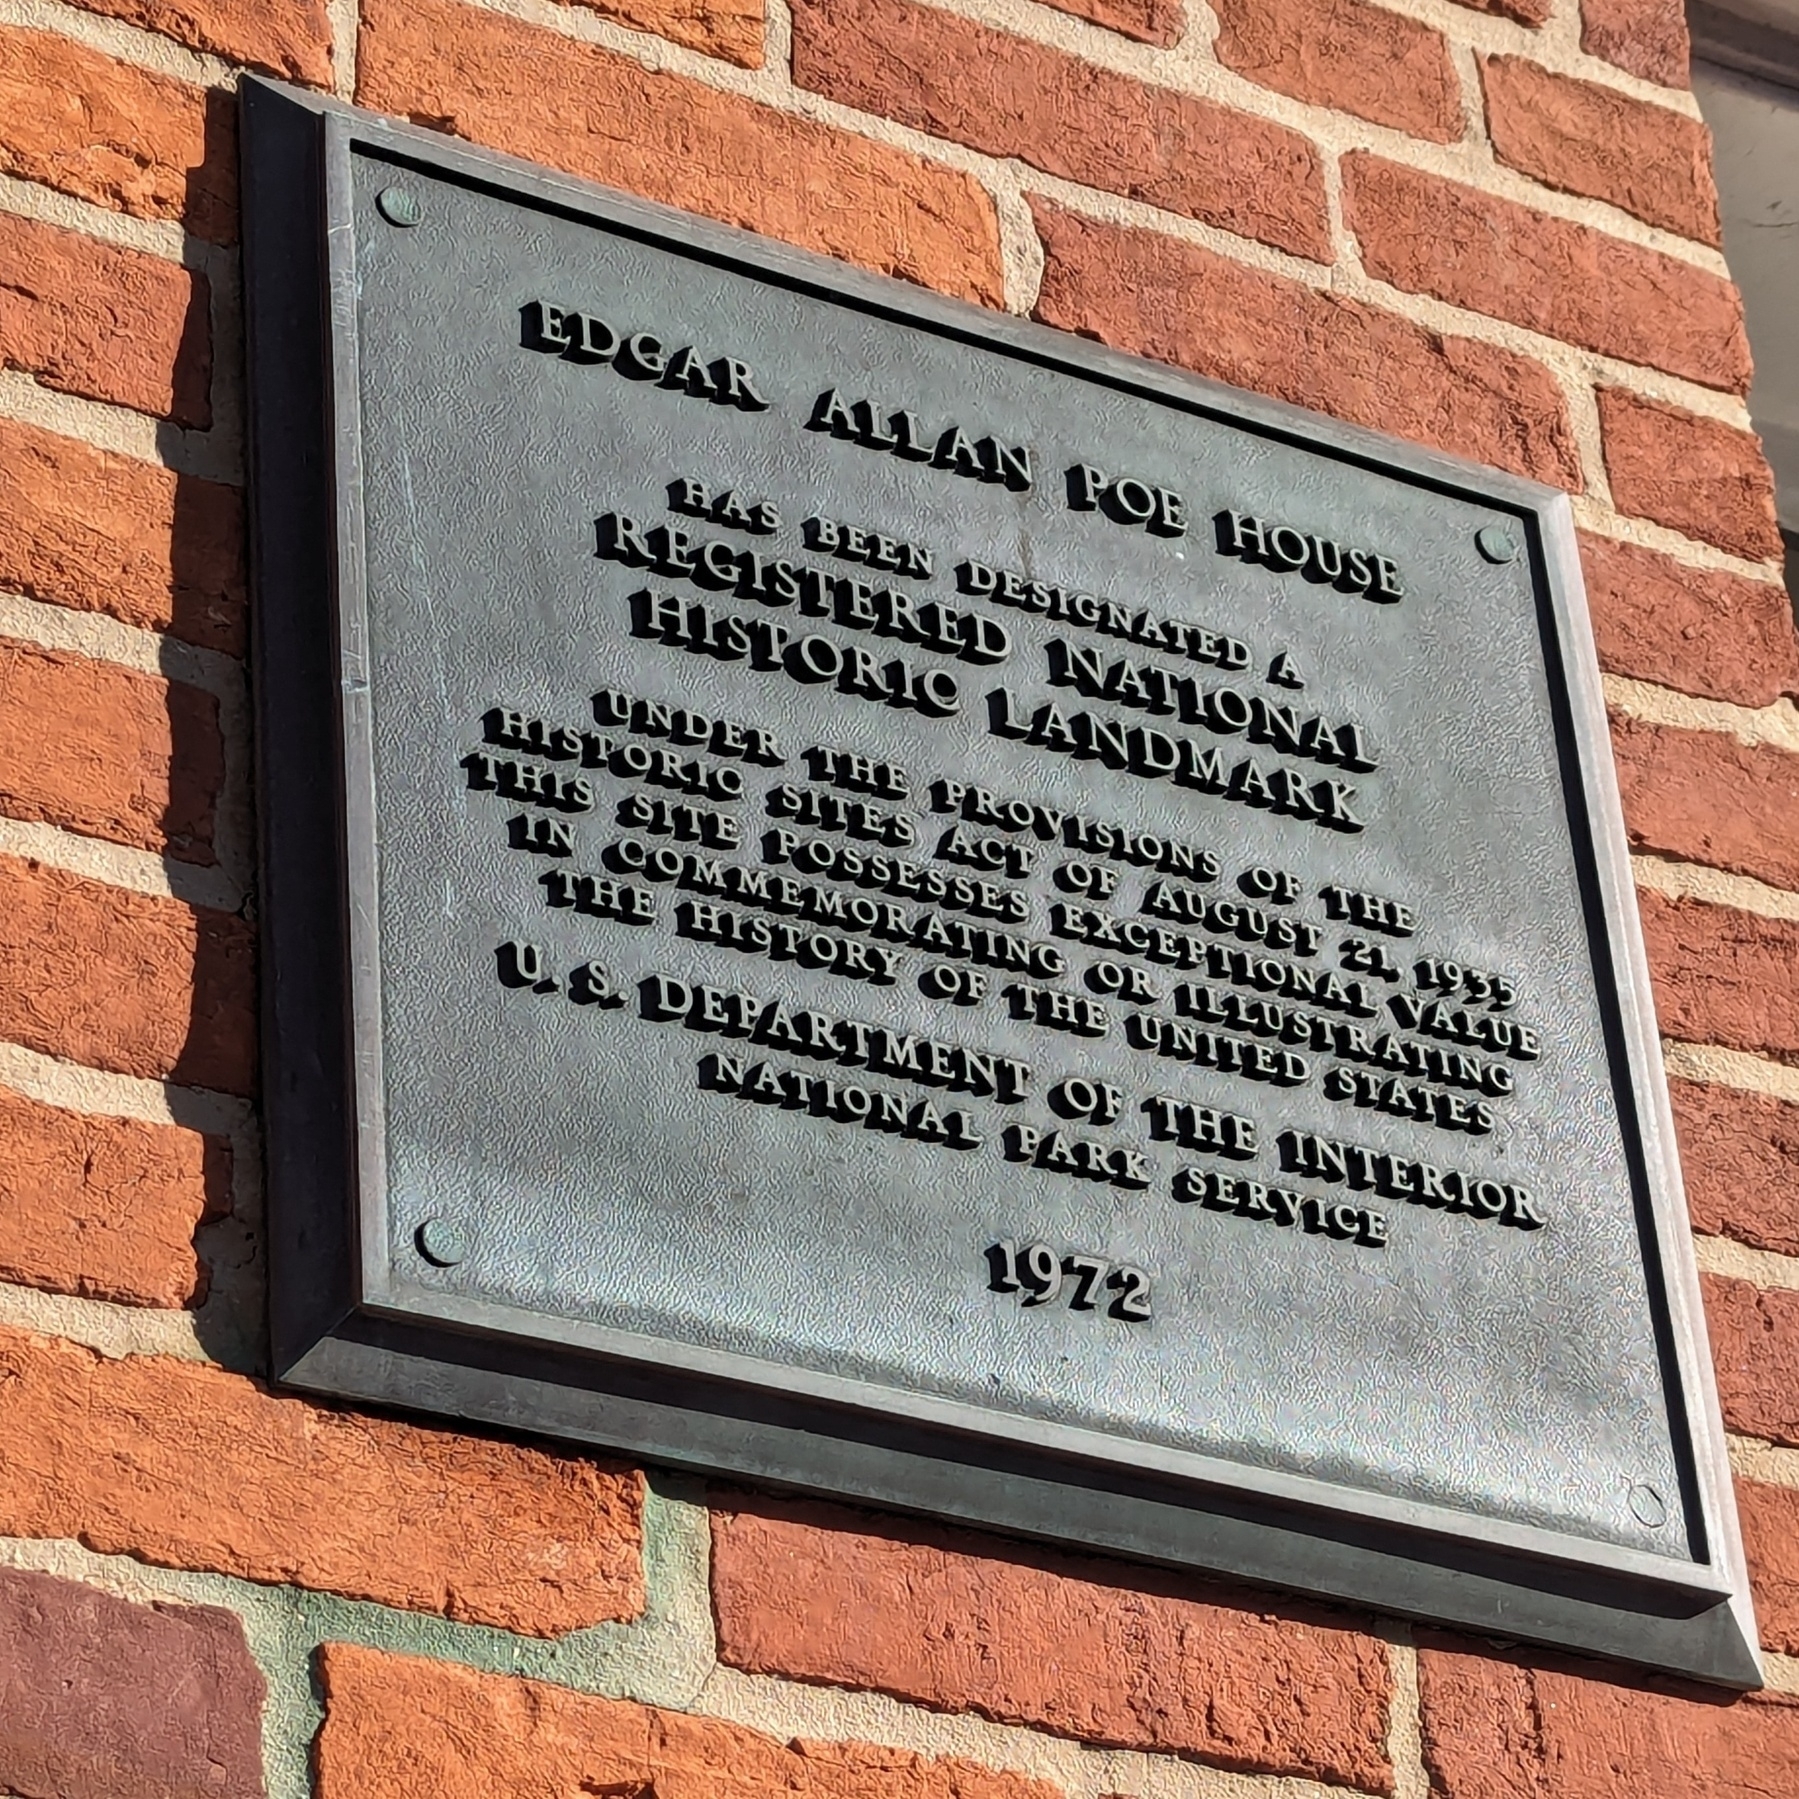 A plaque on a brick wall outside the Baltimore Edgar Allan Poe house, marking it as a National Historic Landmark honoring Poe for his literary achievements.